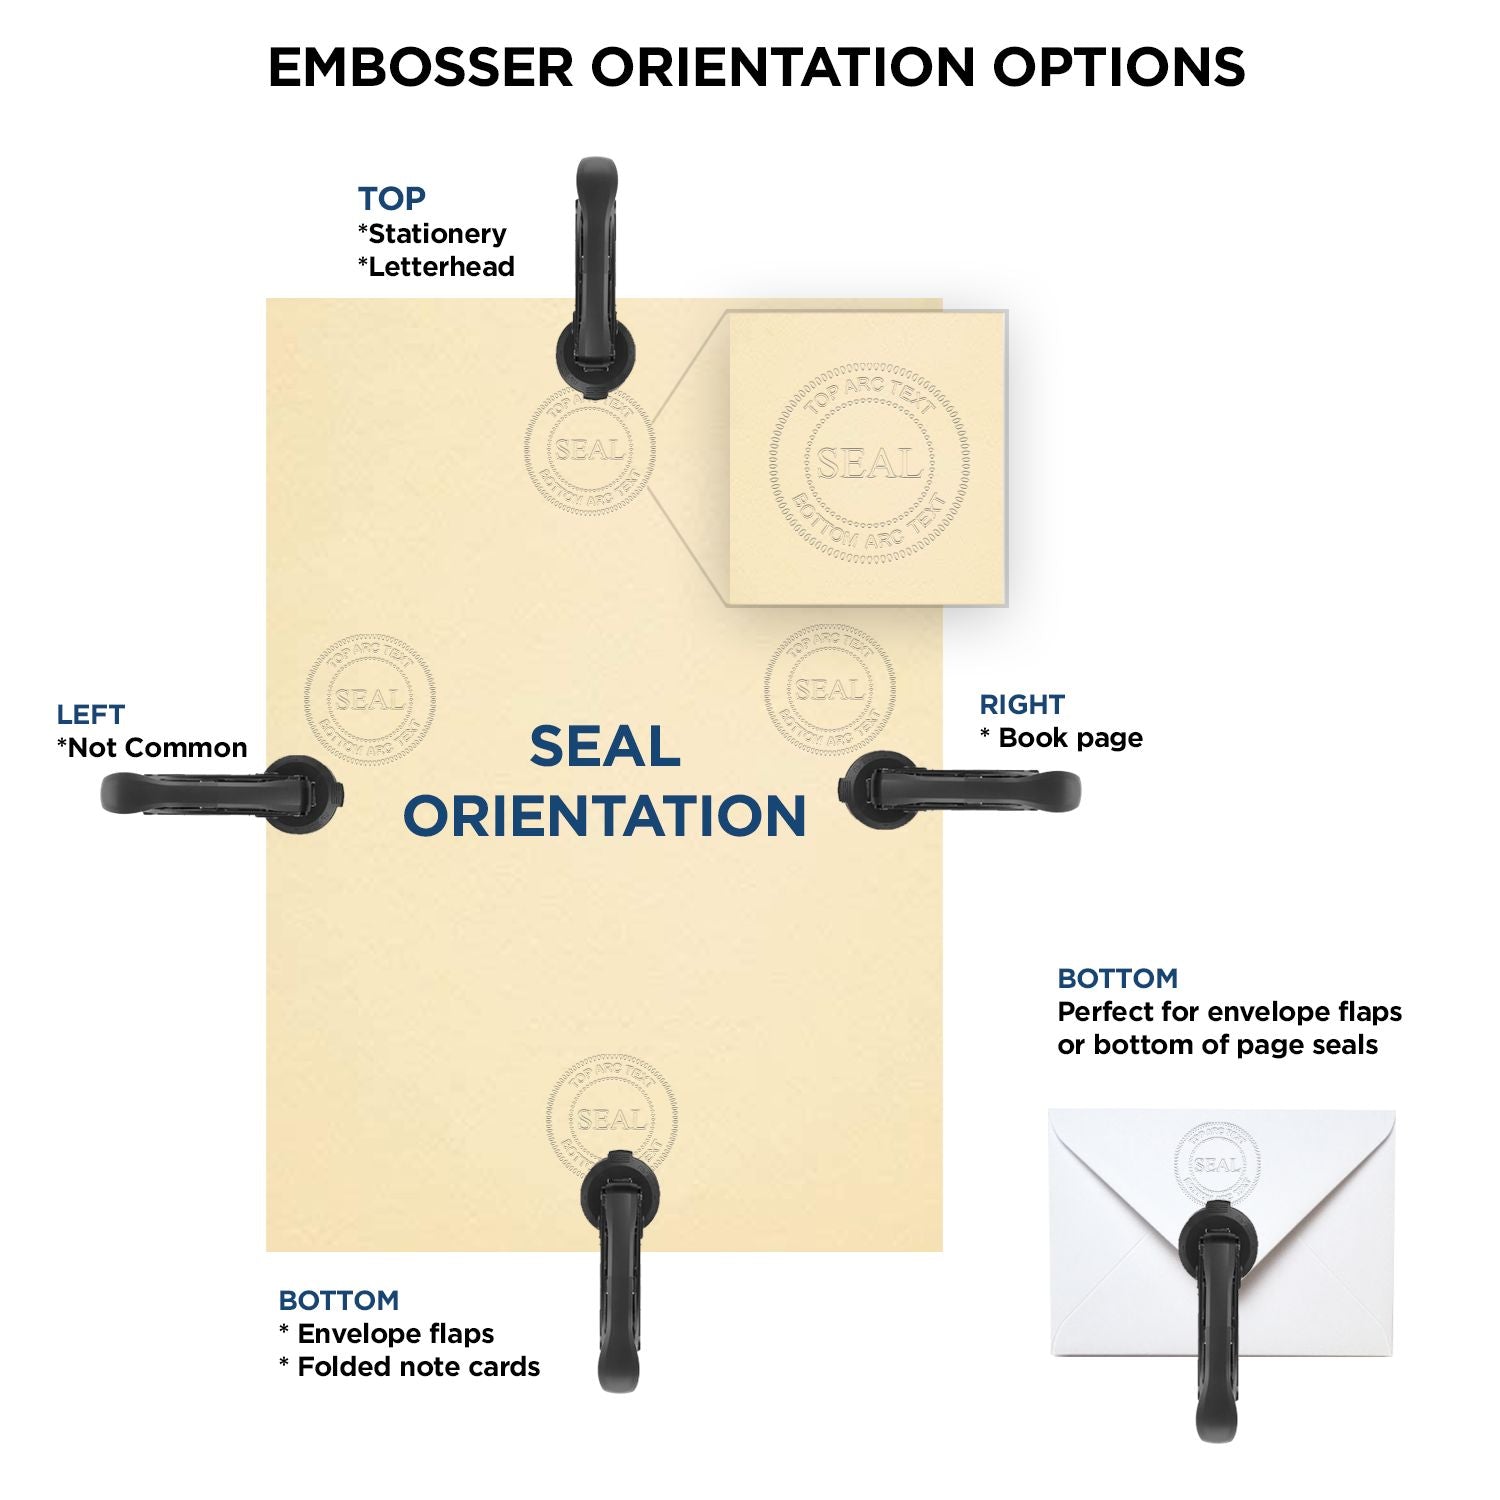 An infographic for the Handheld Oregon Professional Engineer Embosser showing embosser orientation, this is showing examples of a top, bottom, right and left insert.